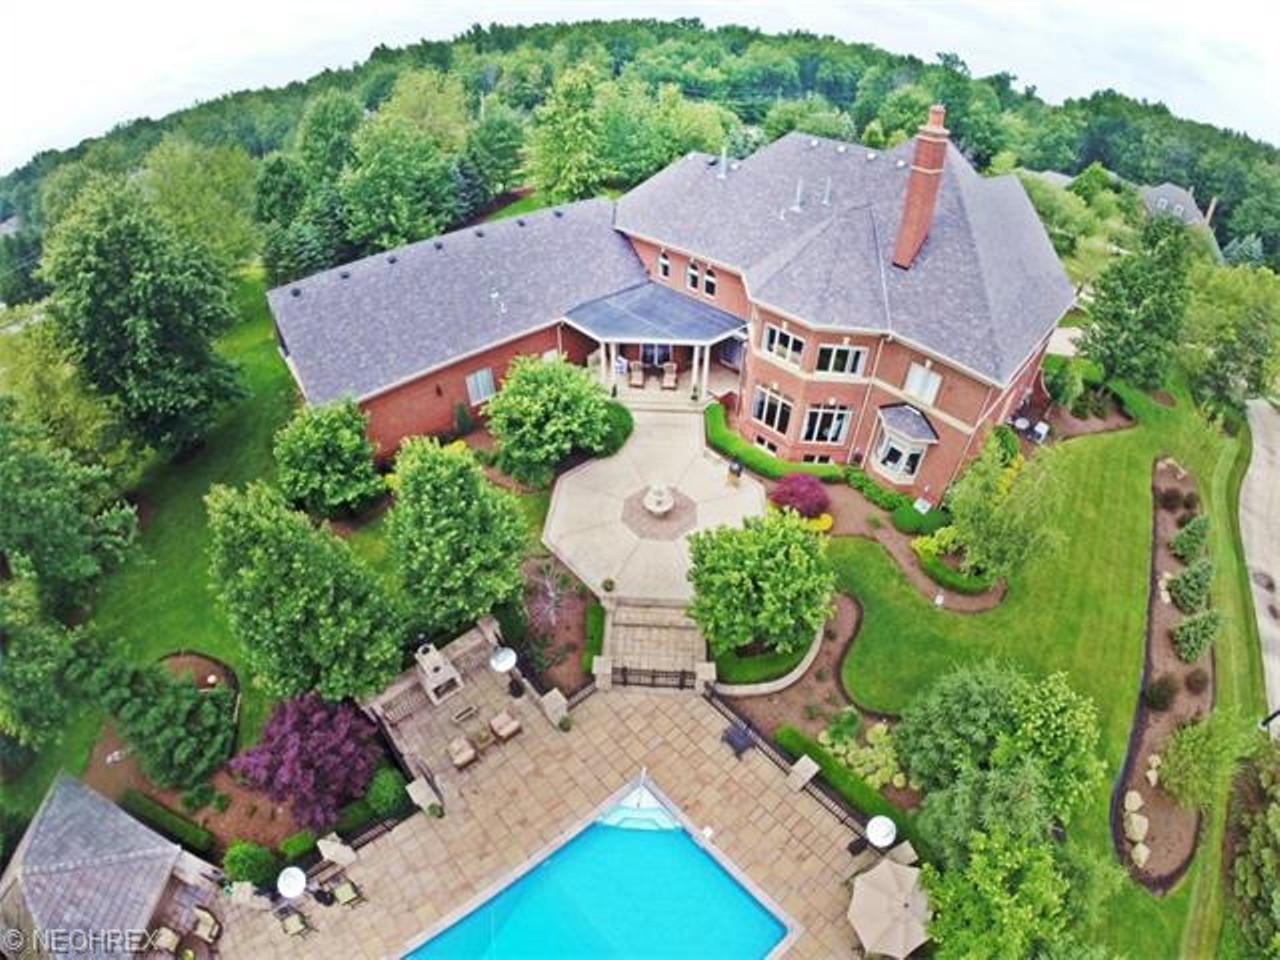 PHOTOS: Ex-Cavs Coach Mike Brown is Selling His Westlake Mansion